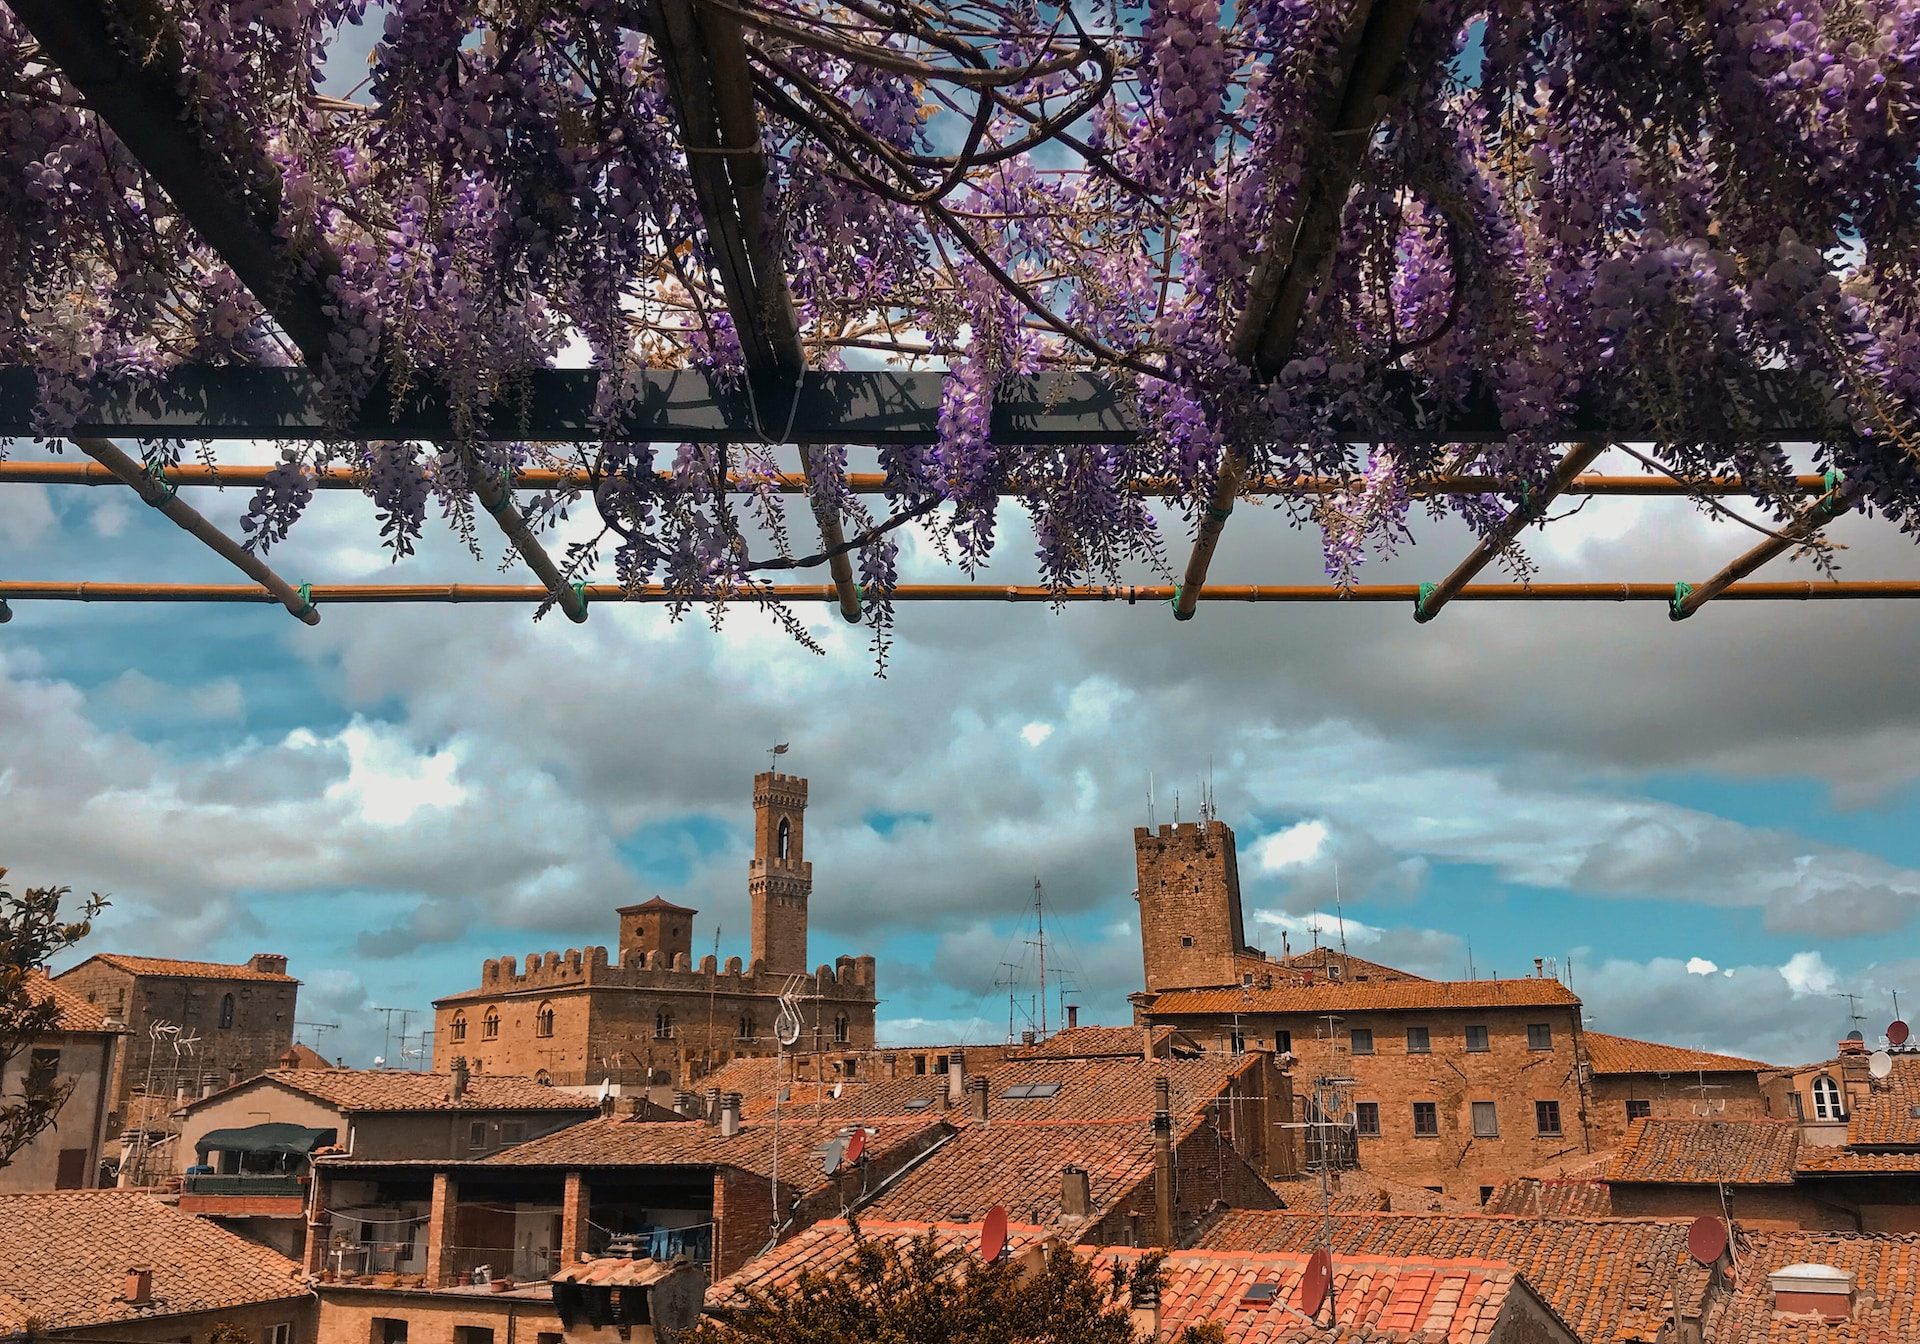 wisteria over volterra in italy in may